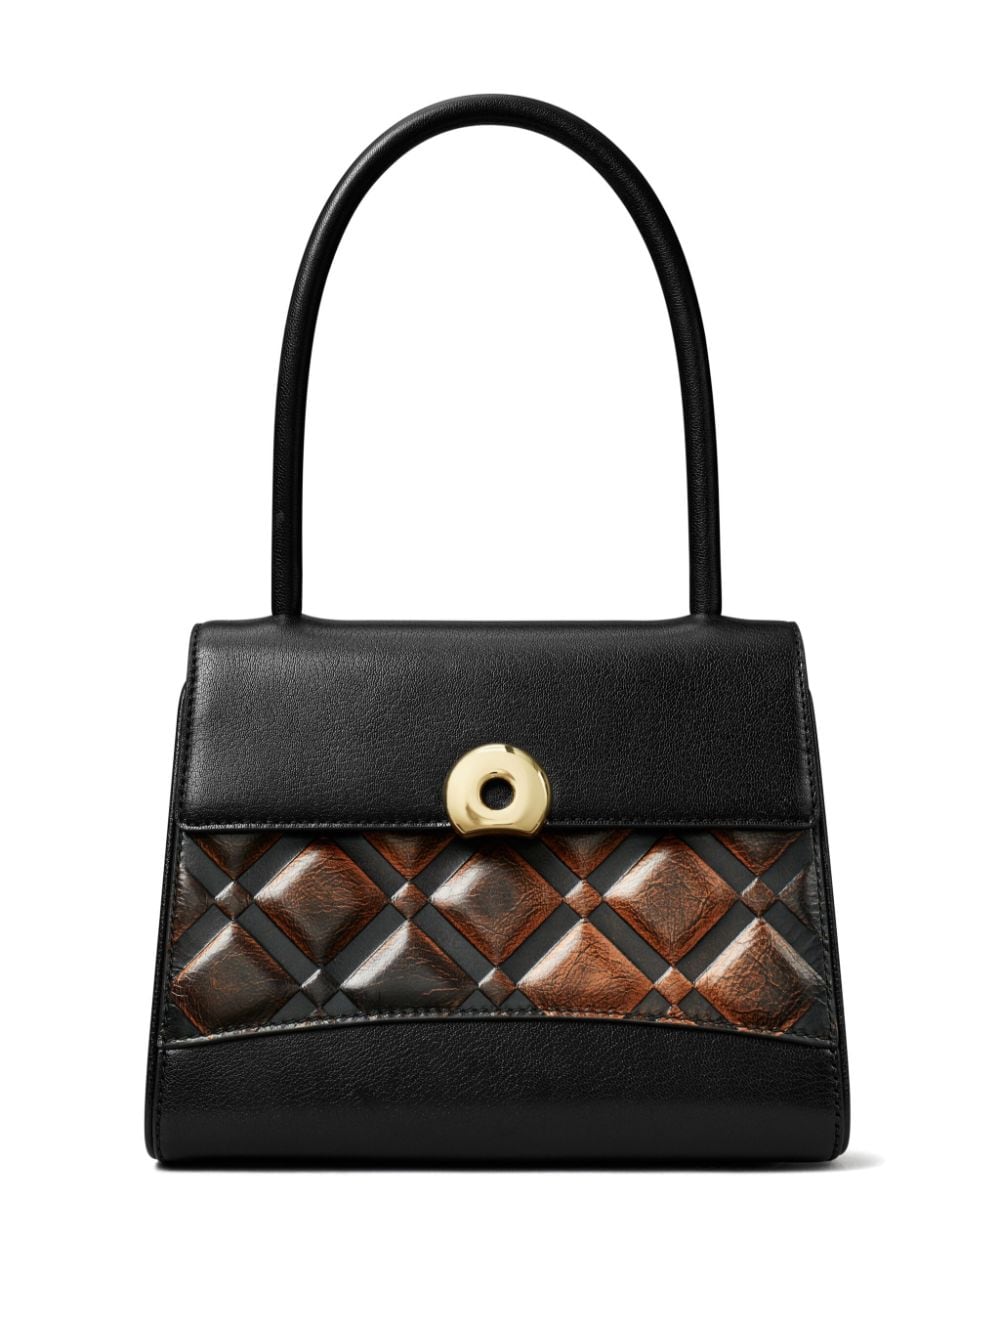 Tory Burch Small Deville Patchwork Tote Bag In Black